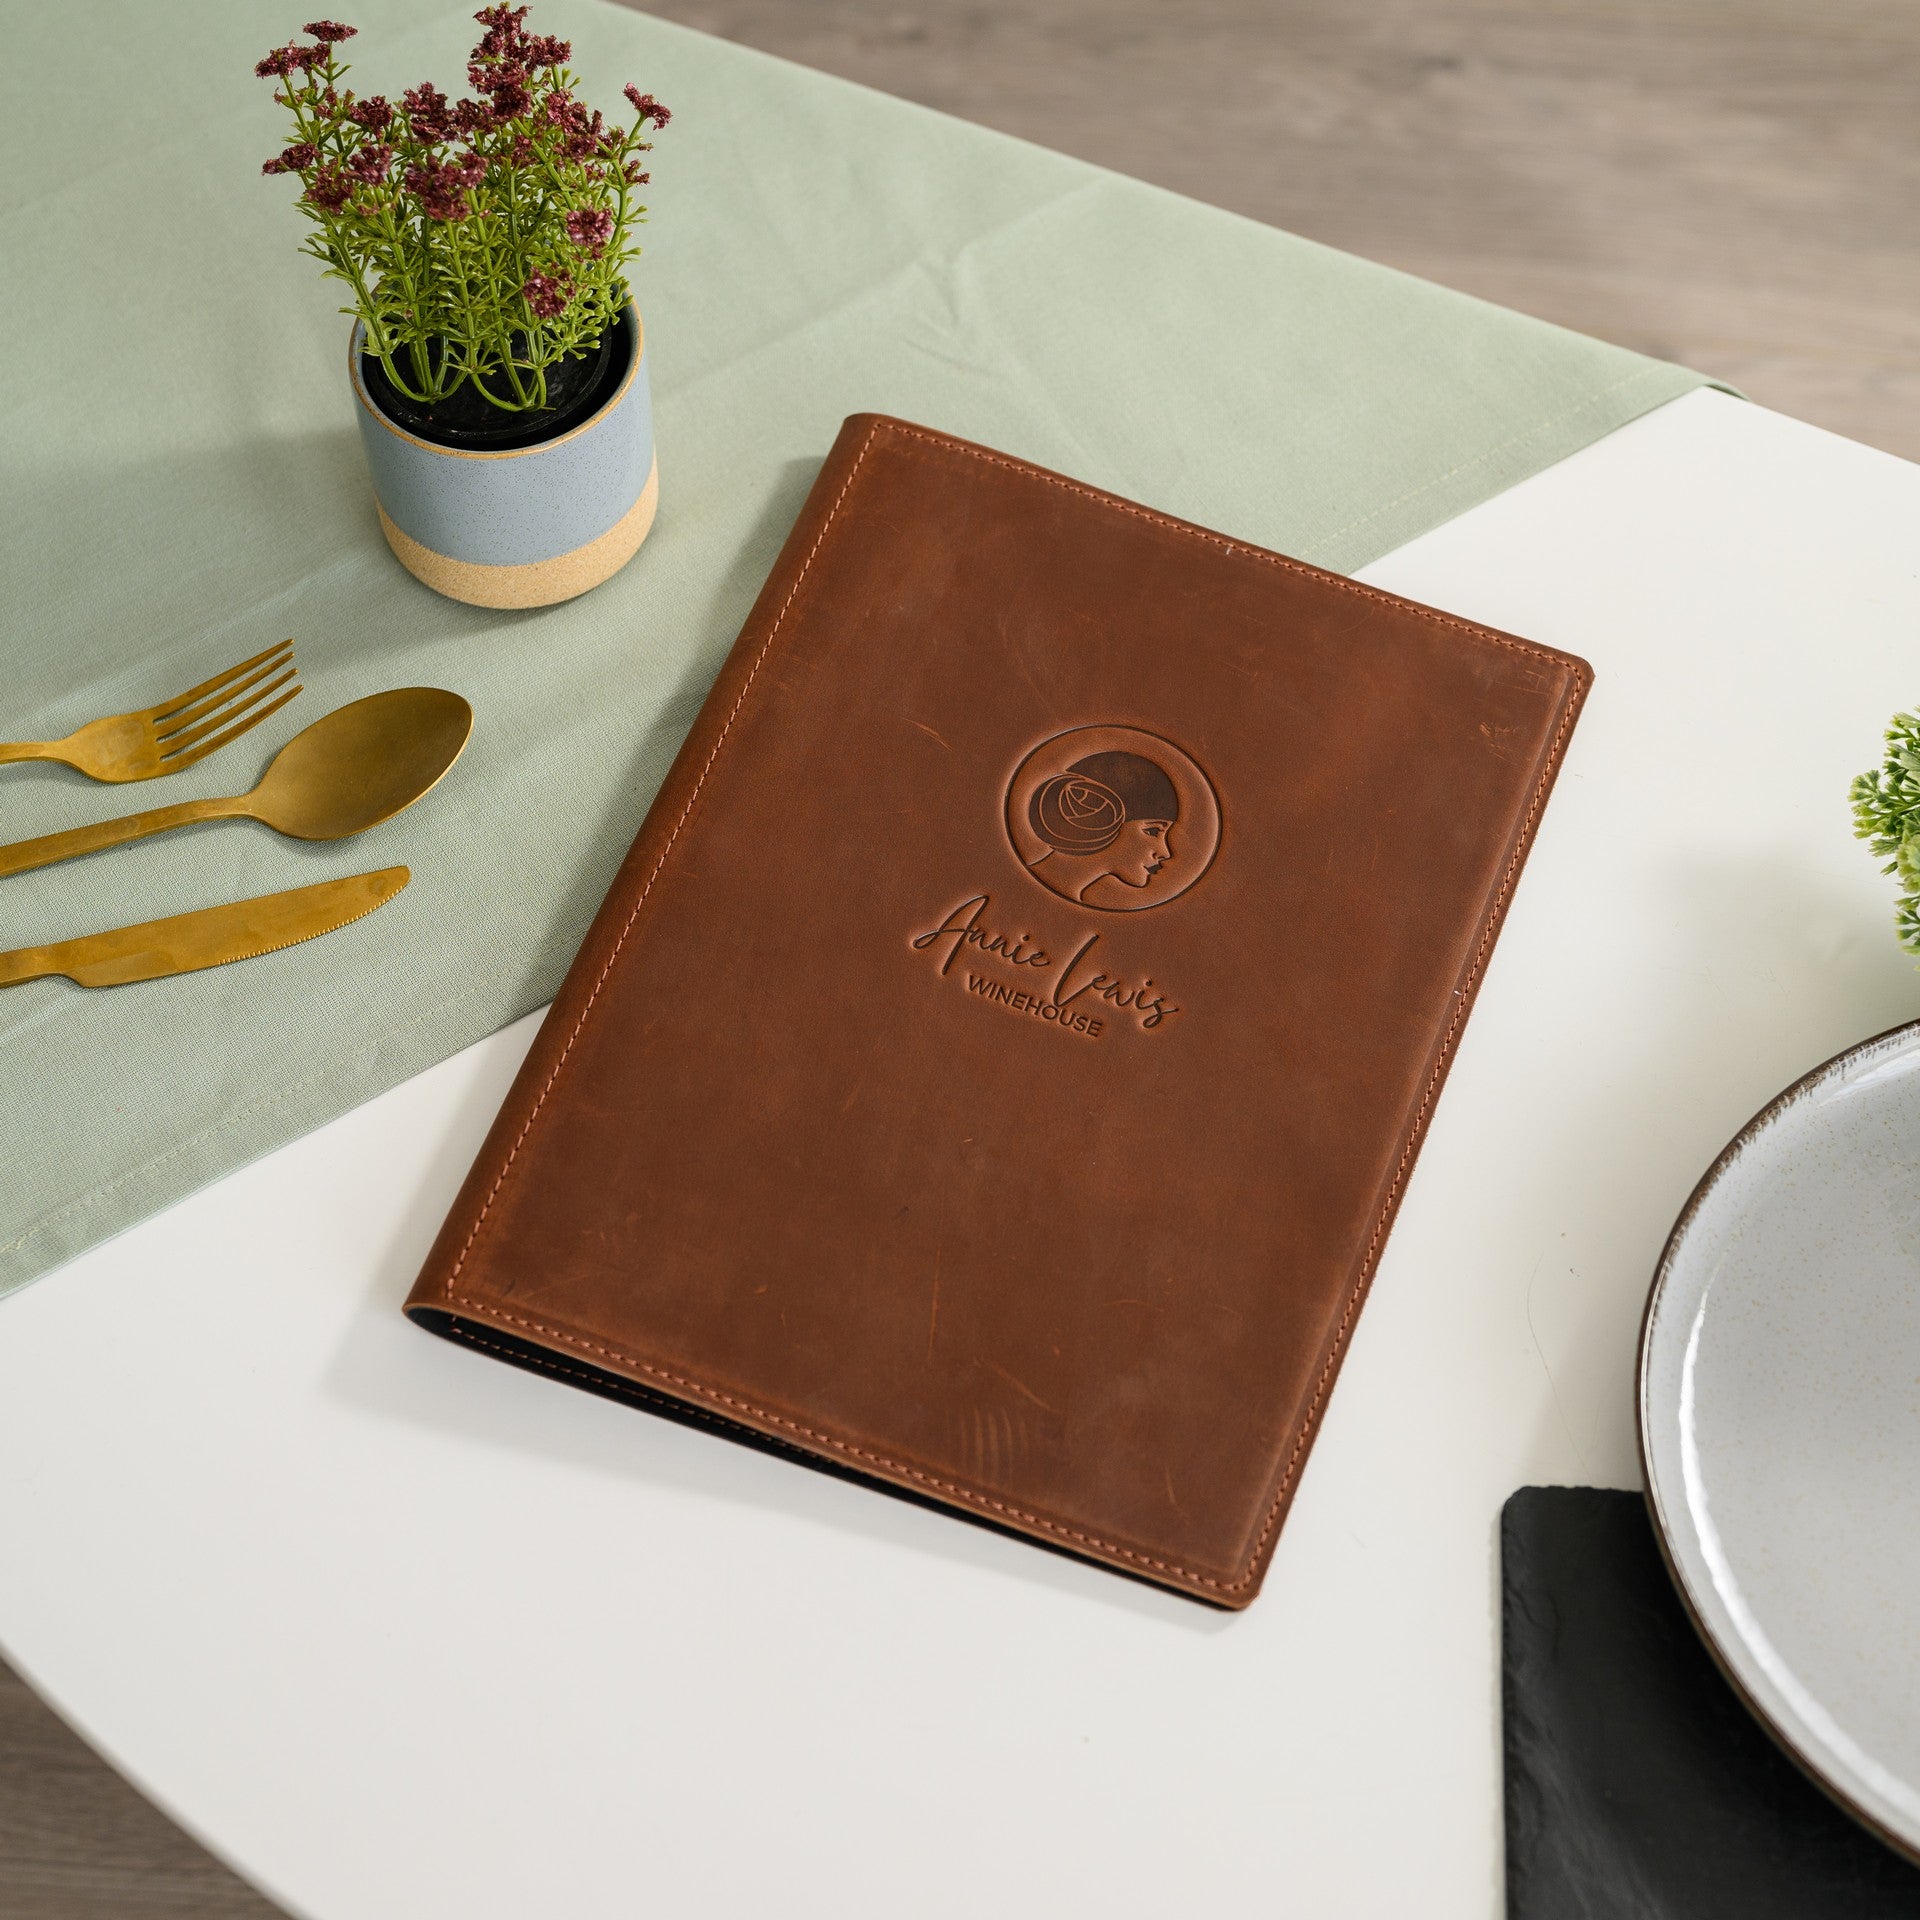 Our hardcover menu card holder offers a sophisticated and durable solution for presenting your restaurant’s menu.